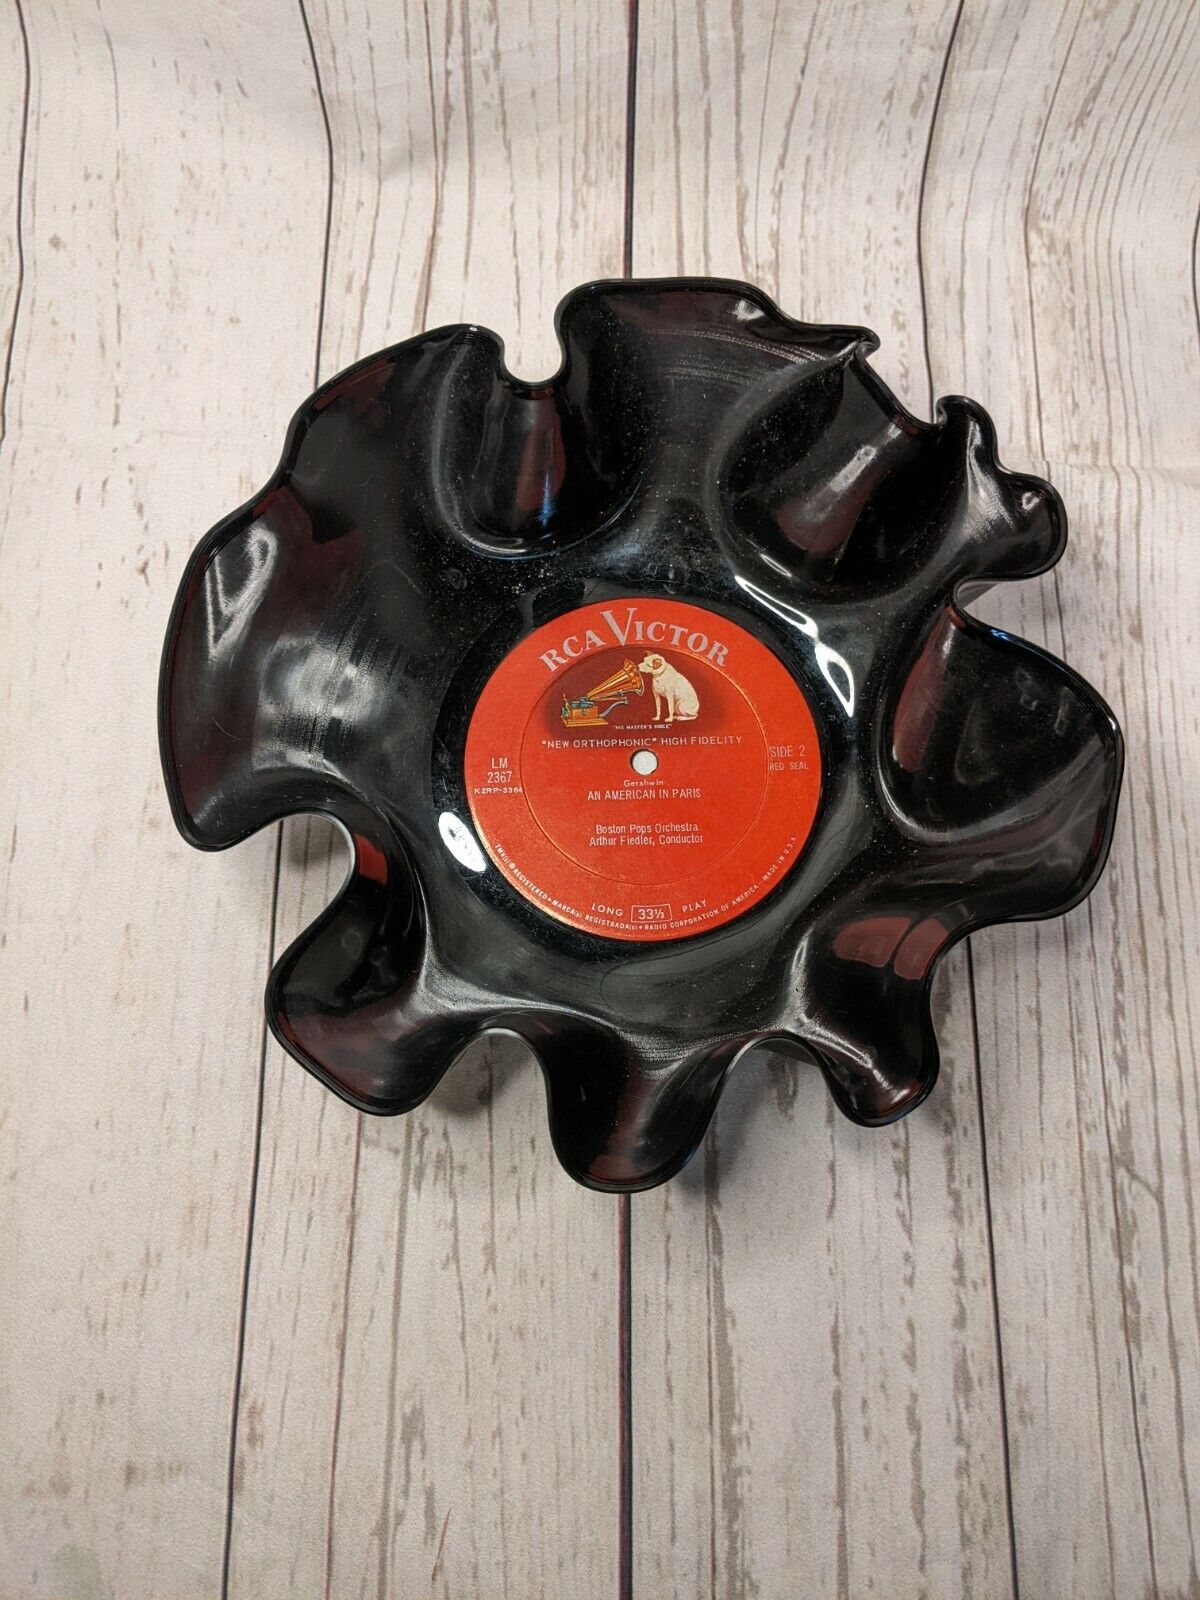 Record Album Bowl Upcycled Recycled Vtg Lp - Rca Victor - An American In Paris